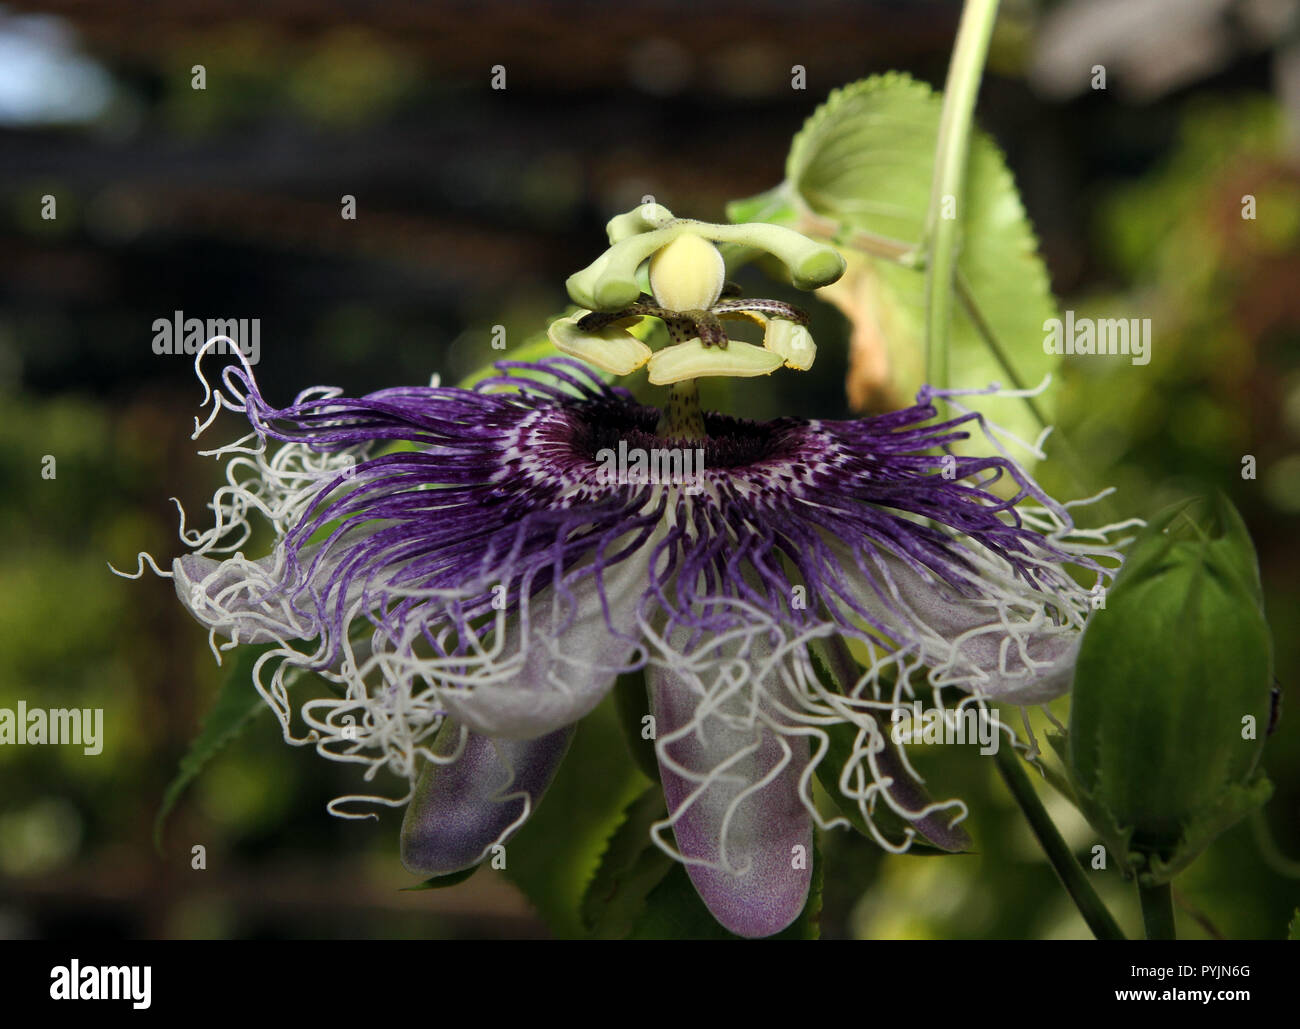 A passiflora flower fully open. Stock Photo